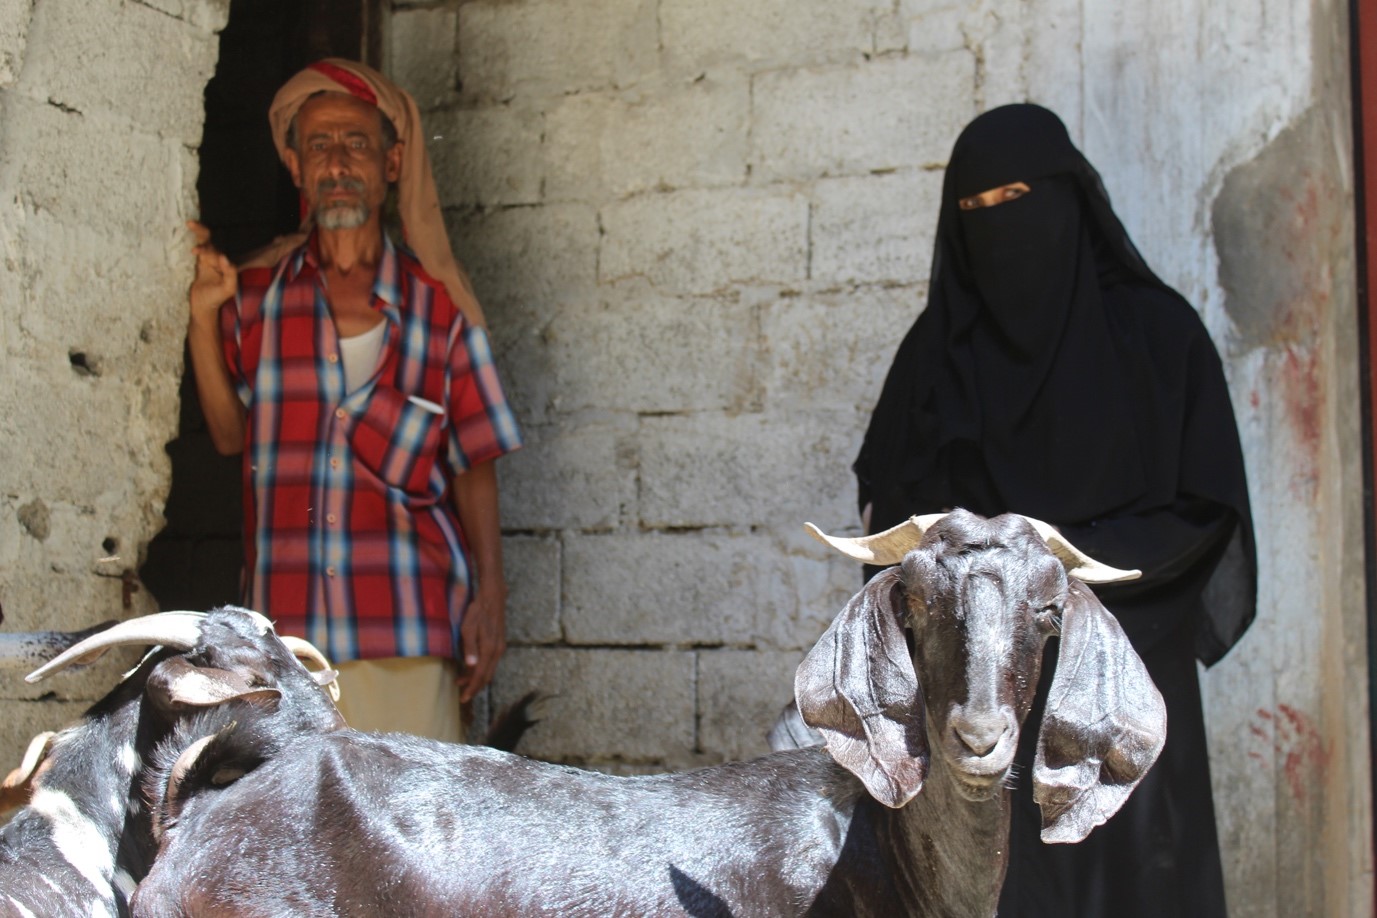 A man and woman standing next to a goat